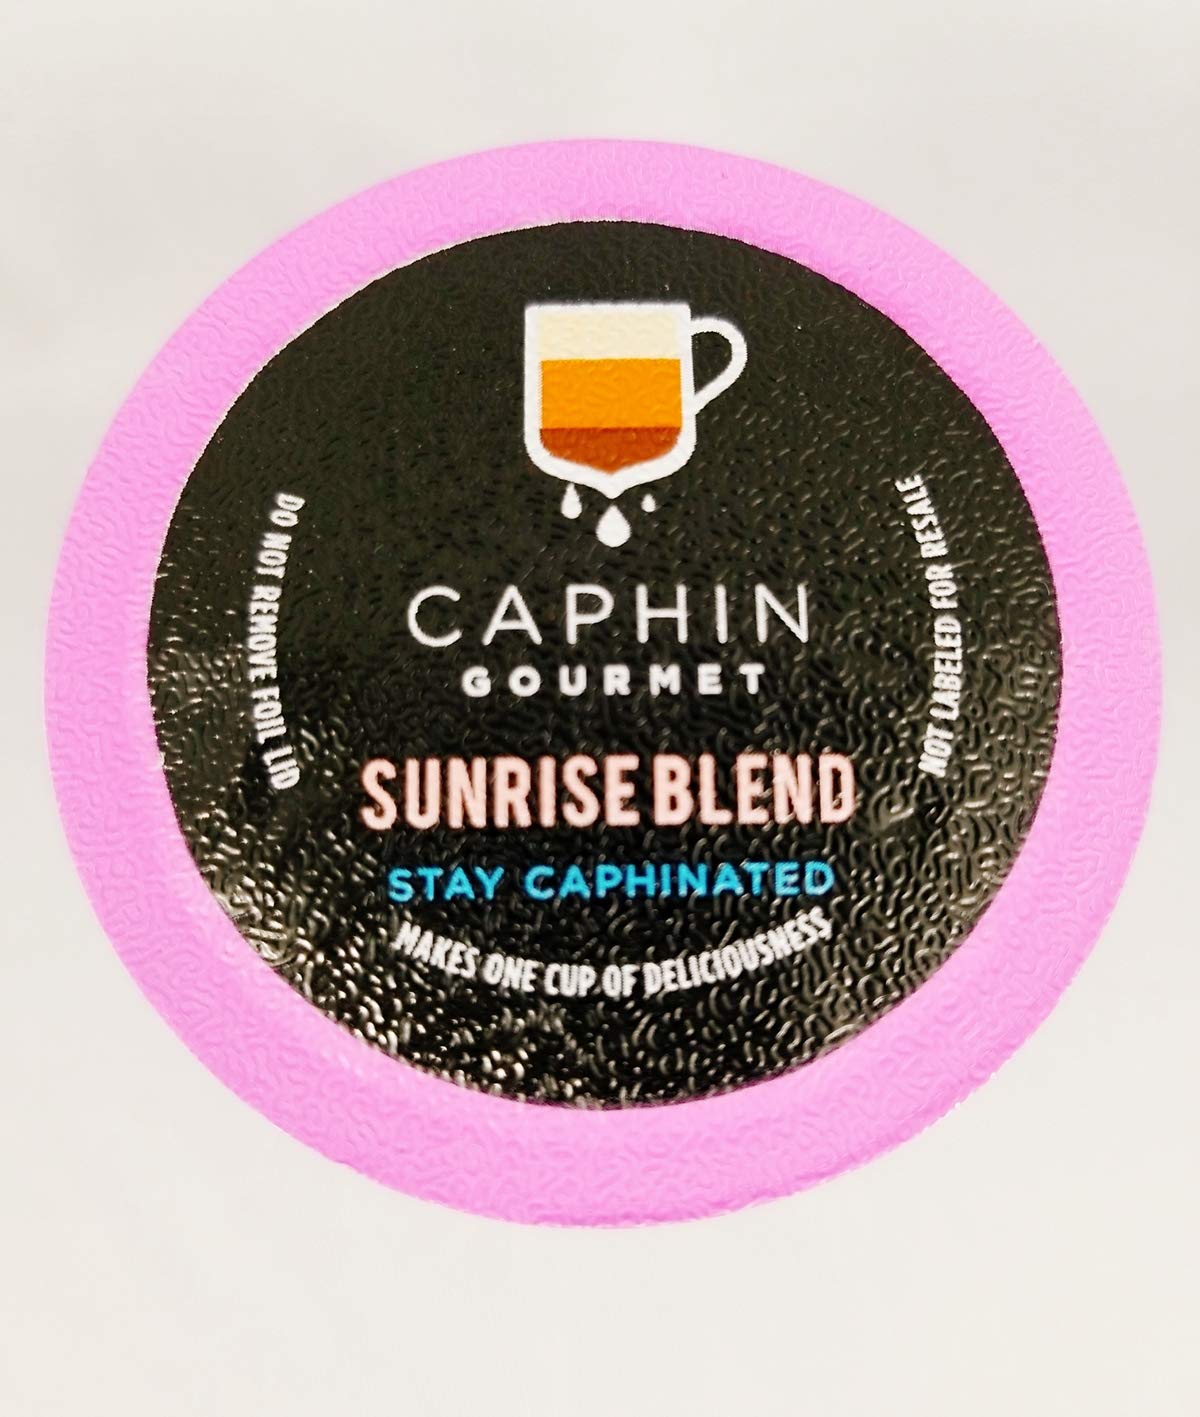 50 Count Sunrise Blend Caphin Gourmet Single-Serve Coffee Pods for Keurig K Cups Brewers (50 Count Compatible with 2.0)